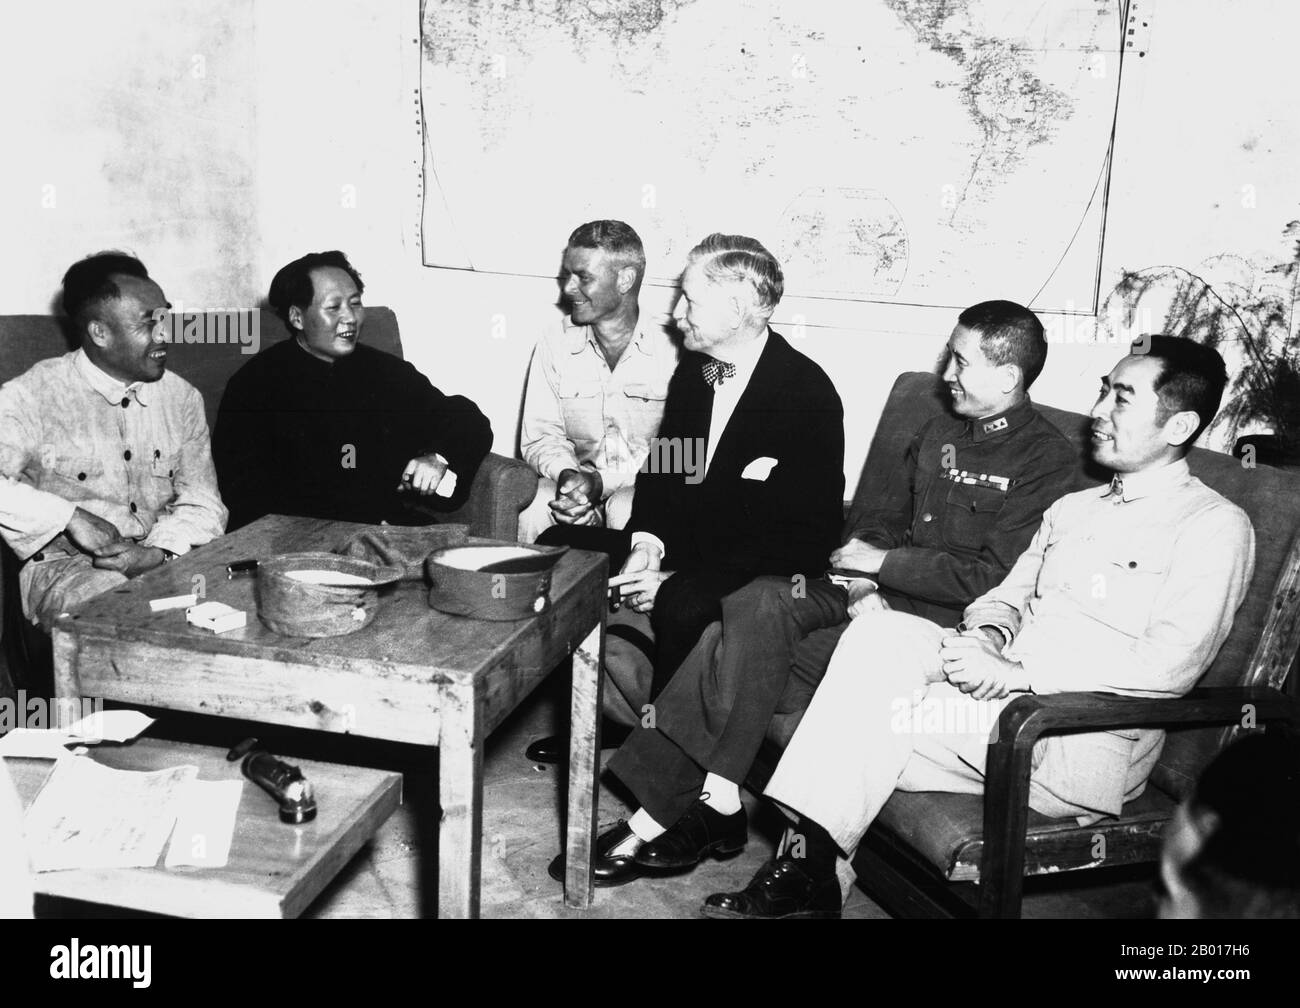 China: Mao Zedong and US Ambassador Patrick Hurley in conference at Yan'an, August 27, 1945.  Conference at Yenan Communist Headquarters. Central figures are U.S. Ambassador Patrick J. Hurley, Col. I.V. Yeaton, U.S. Army Observer, Mao Zedong, Zhu De and Zhou Enlai. Stock Photo